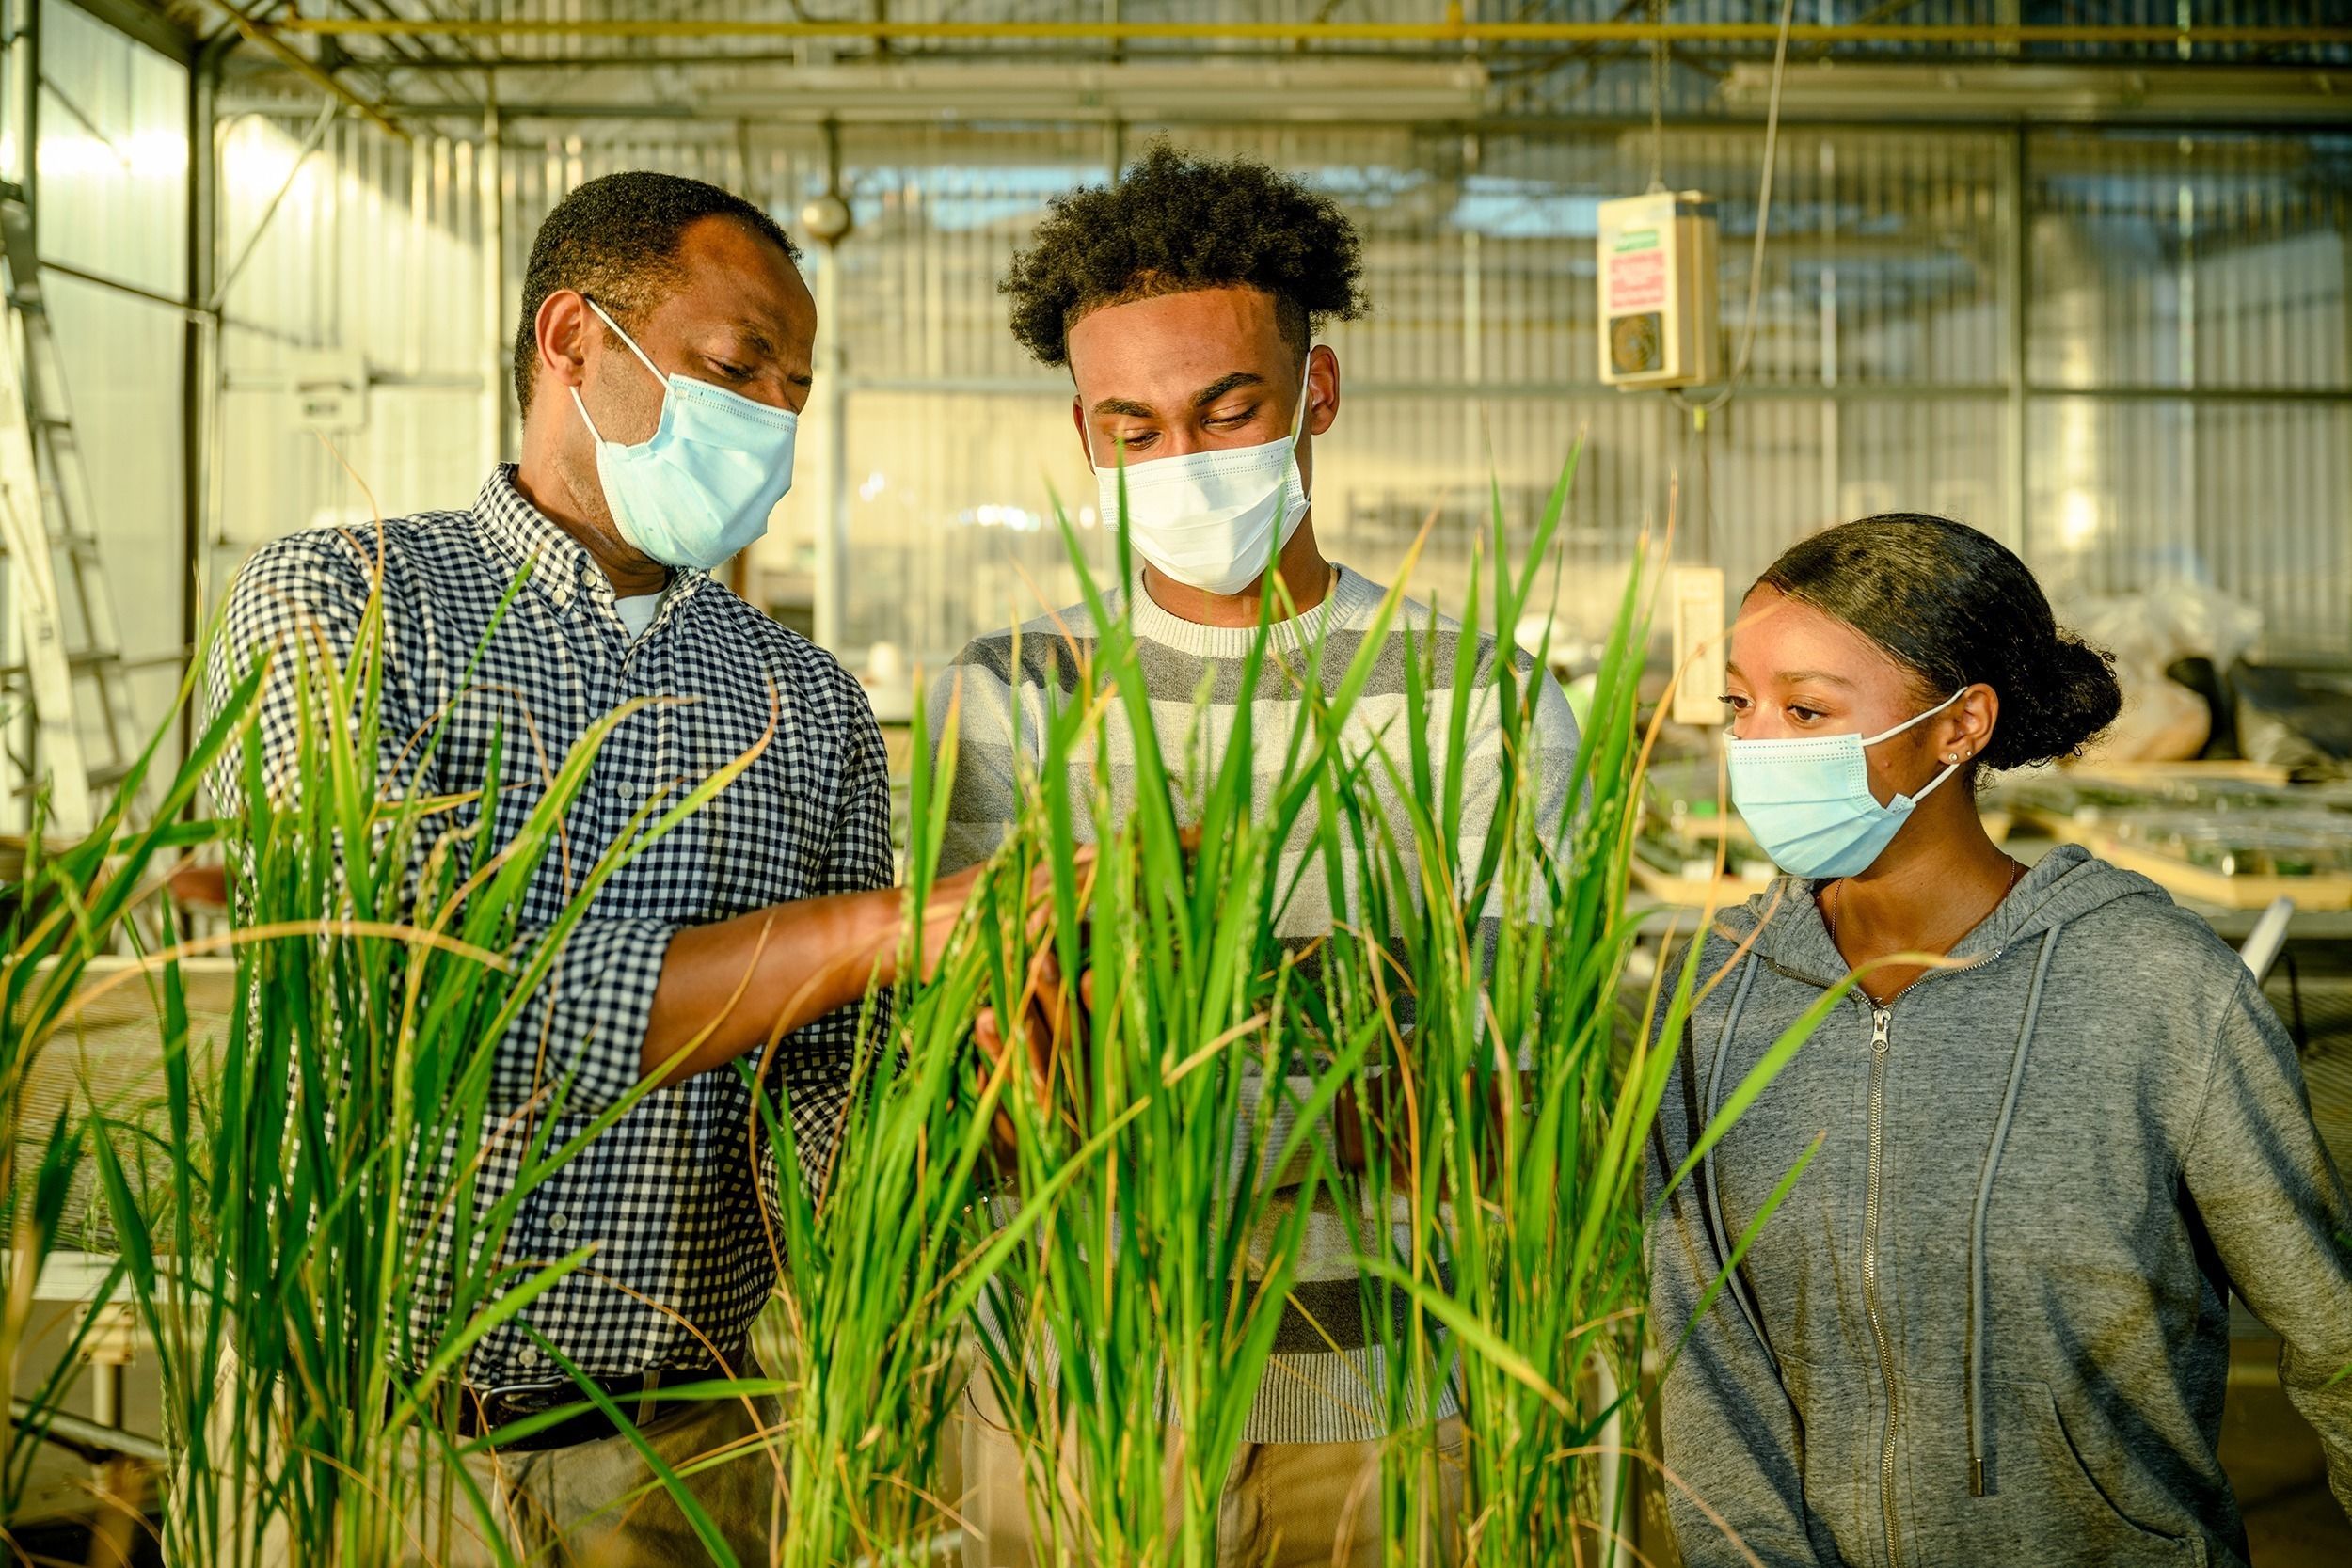 Dr. Osena and his undergrads Staples and Lyons examine plants in the greenhouse. 